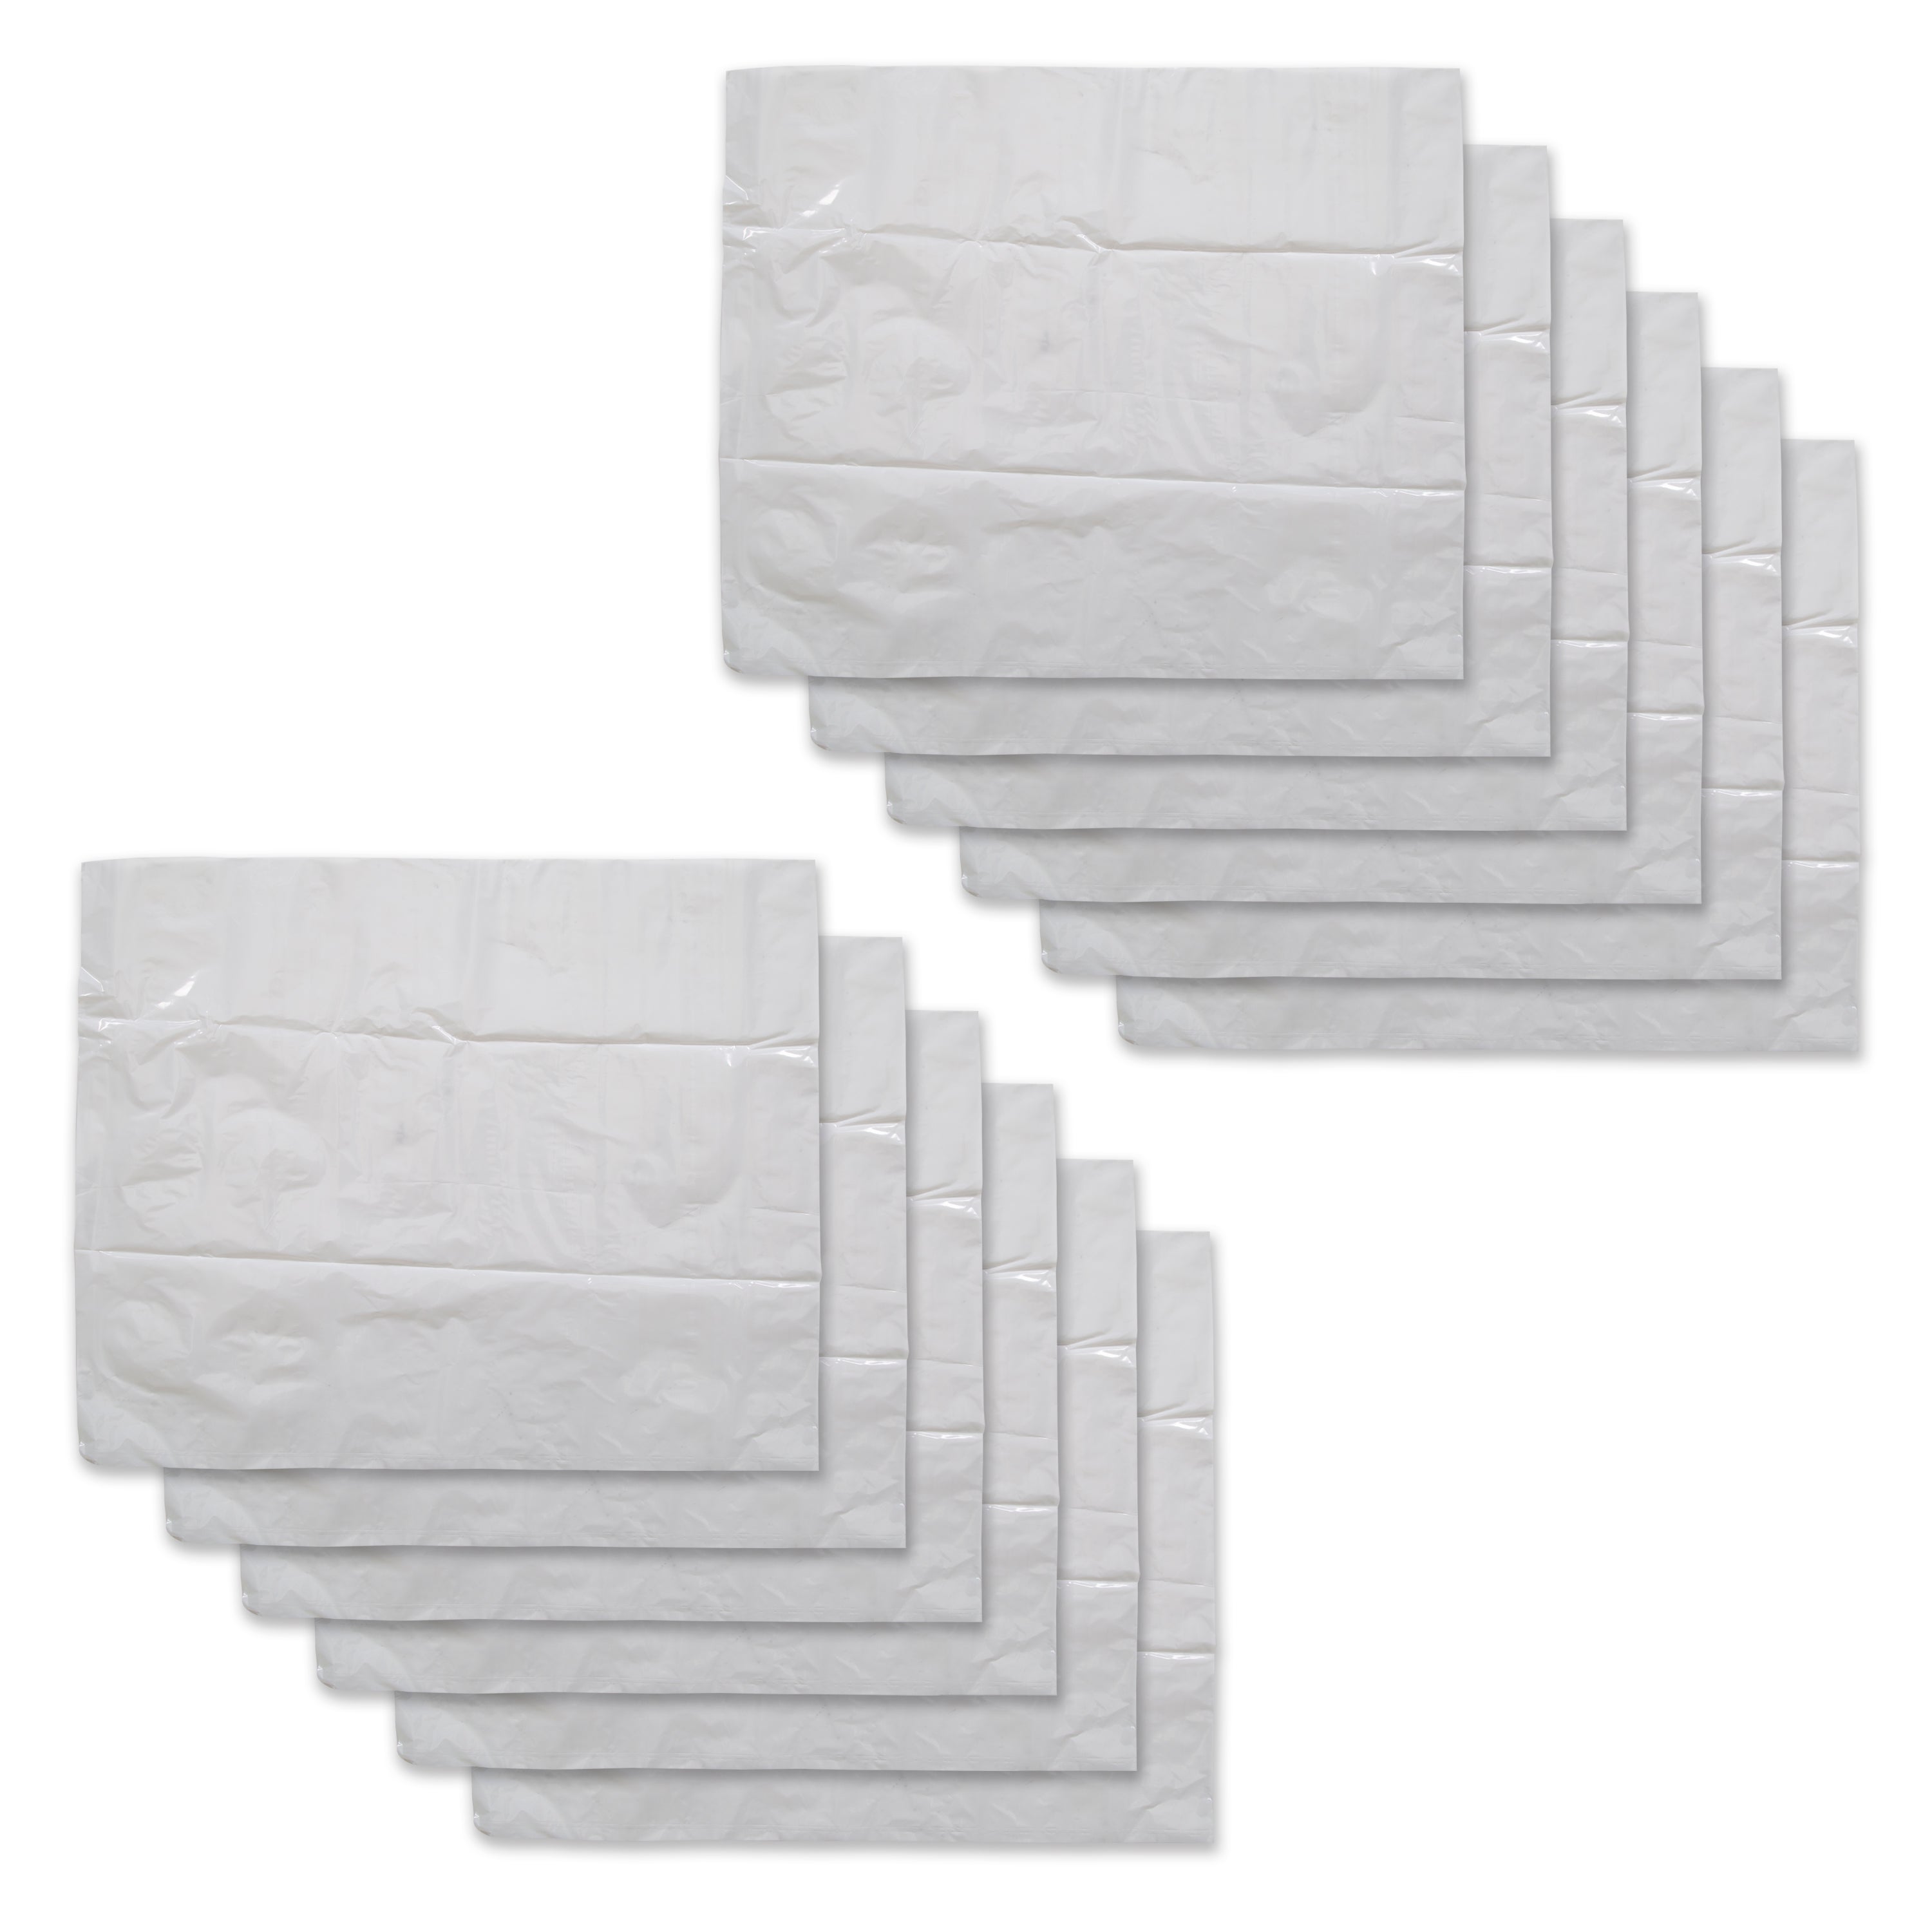 Plastic Replacement Toilet Bags